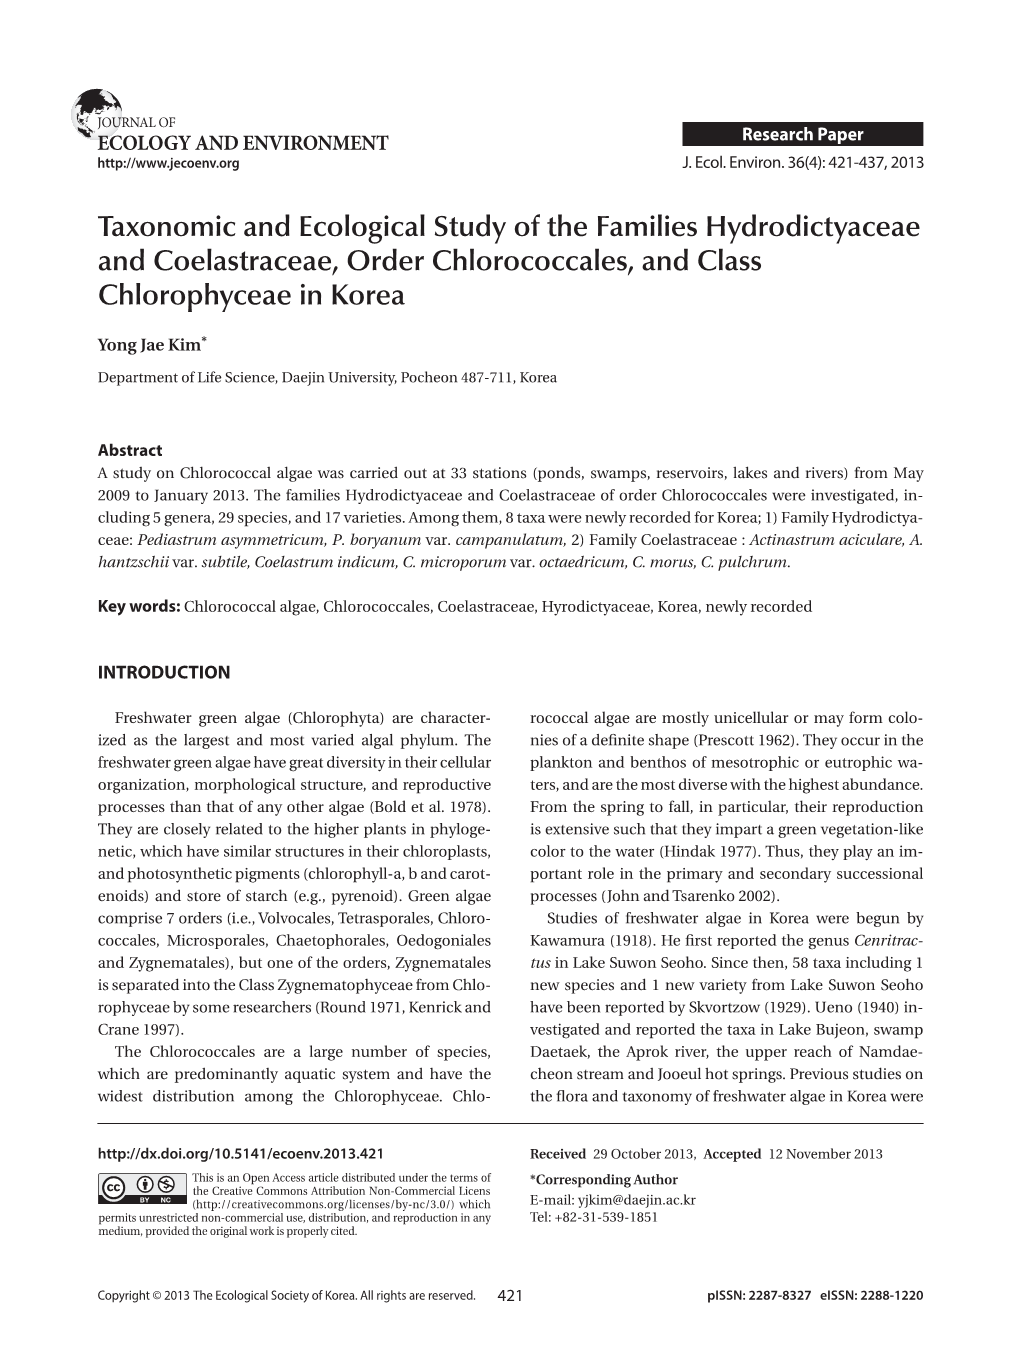 Taxonomic and Ecological Study of the Families Hydrodictyaceae and Coelastraceae, Order Chlorococcales, and Class Chlorophyceae in Korea